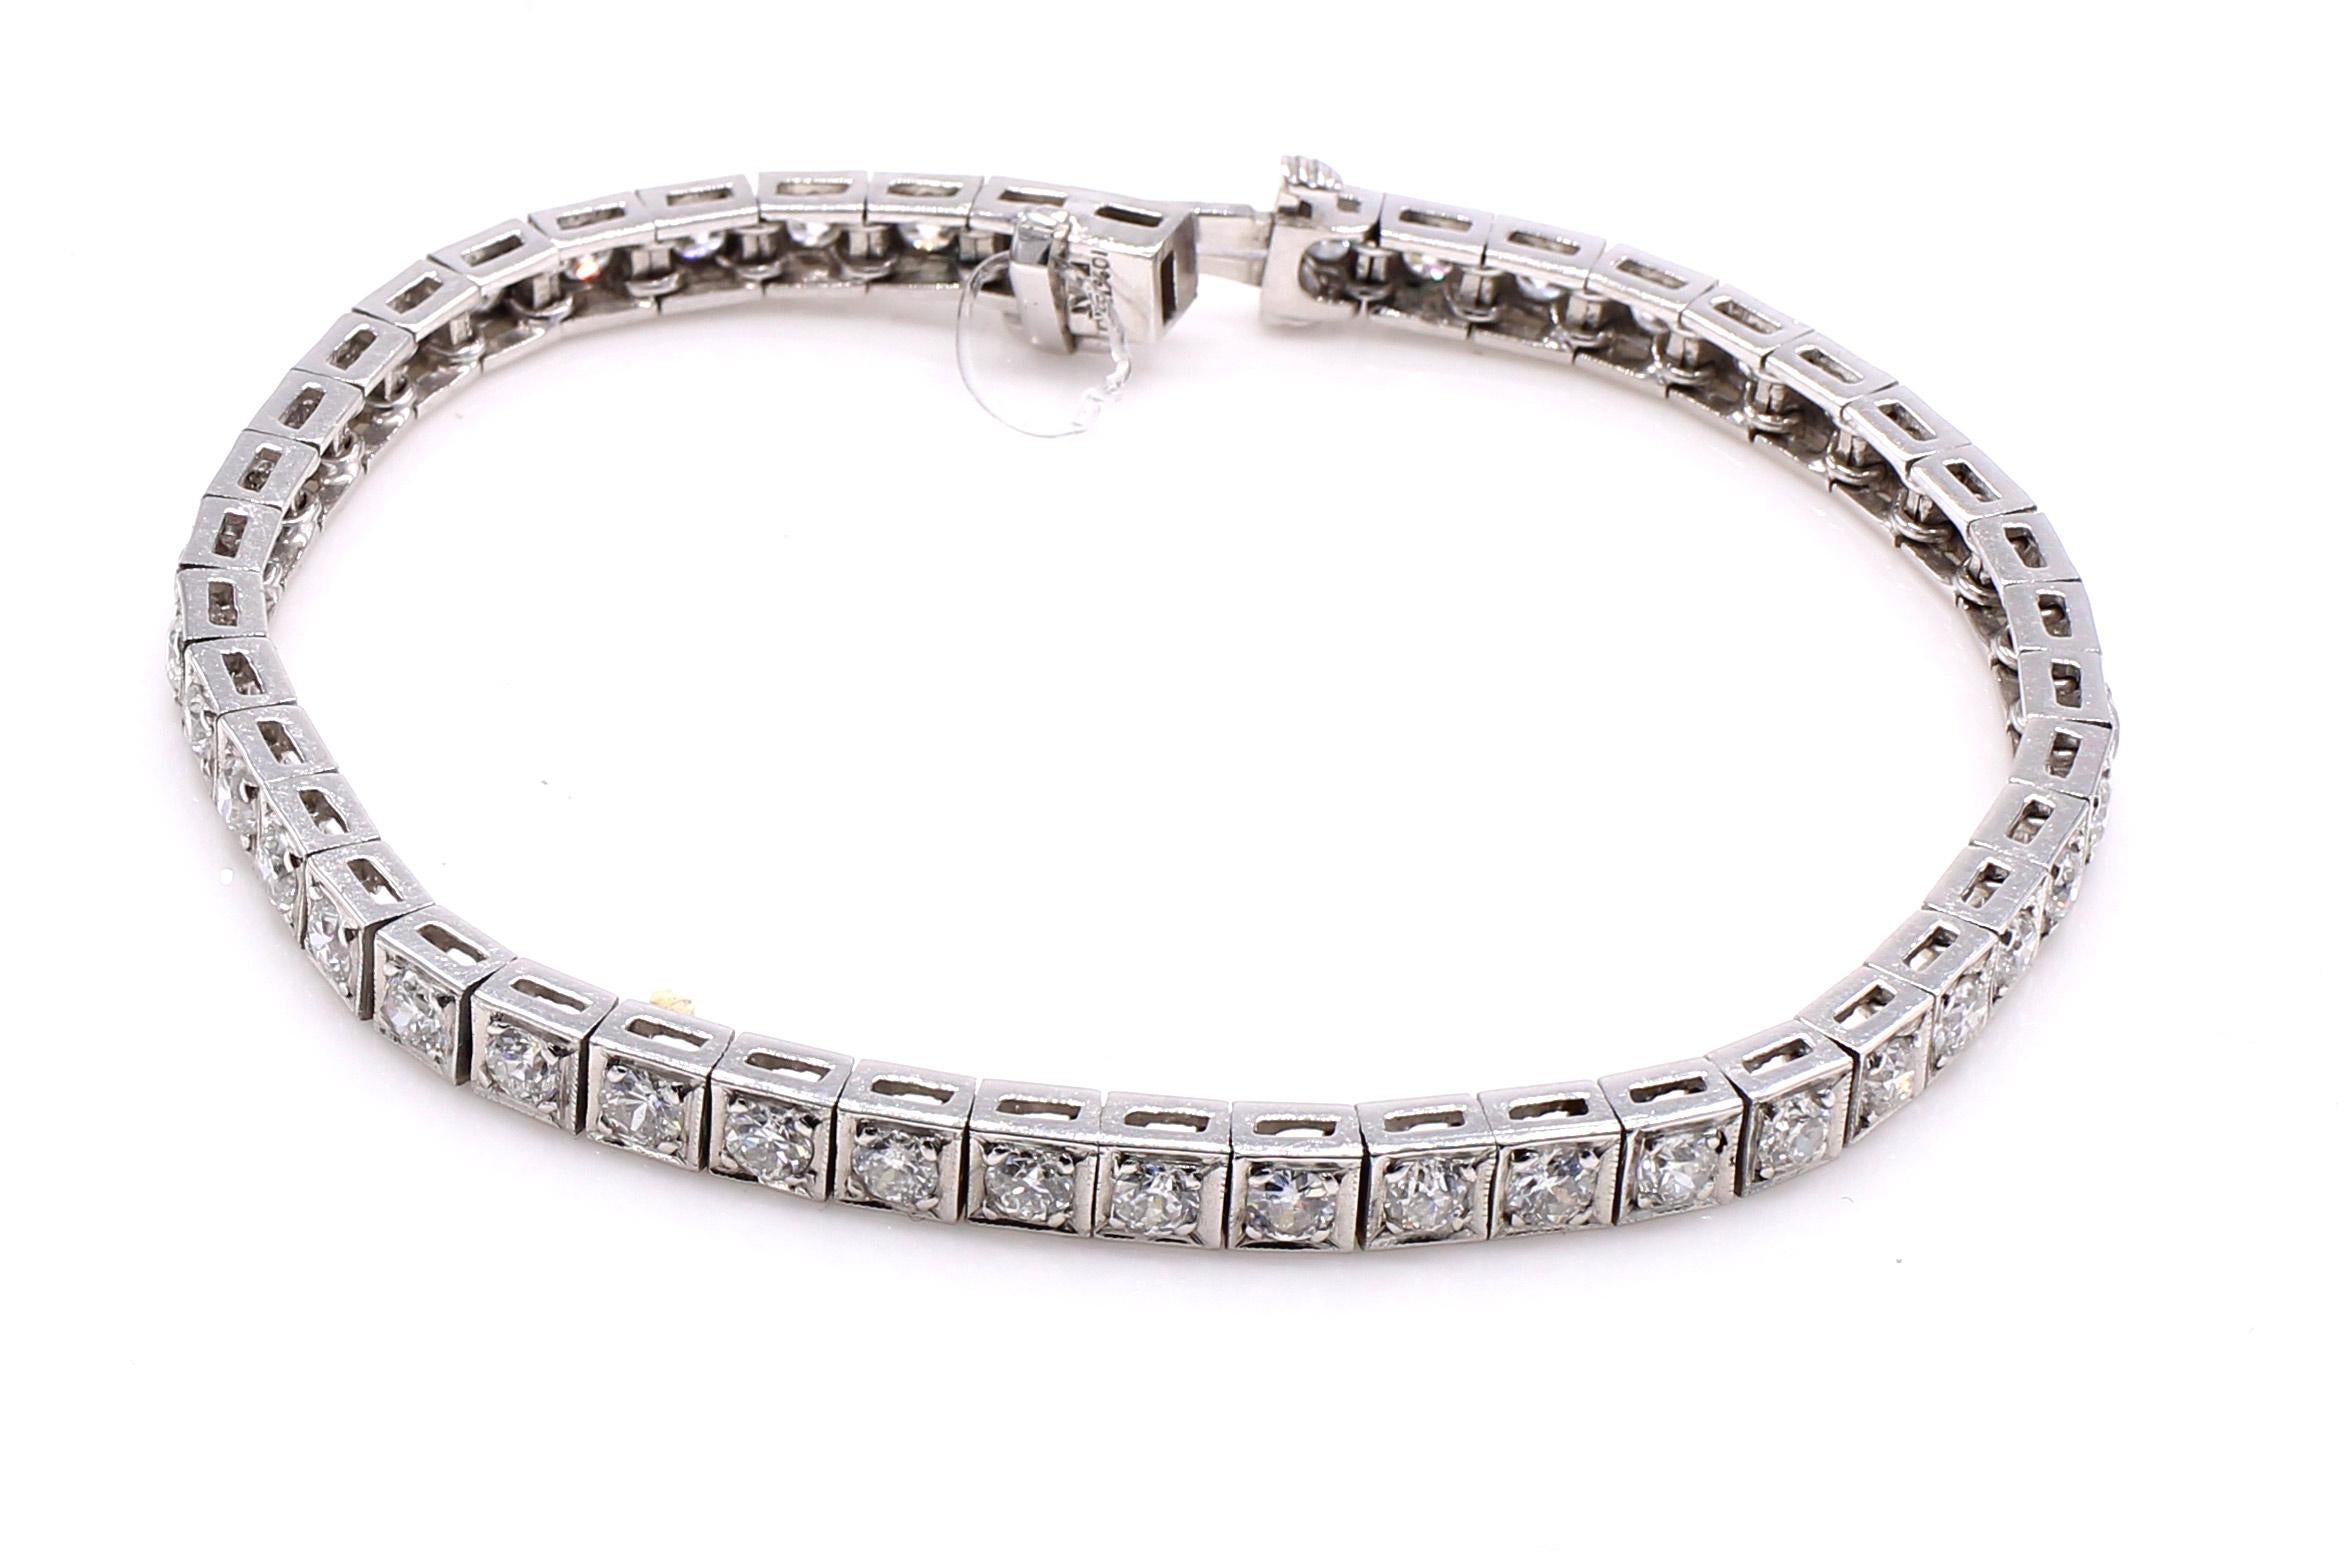 Wonderfully handcrafted this Art Deco diamond line bracelet from ca 1935 is the most wearable every day piece of jewelry for all occasions. Set in platinum with 45 perfectly matched Old European cut diamonds this bracelet sparkles on the wrist. The